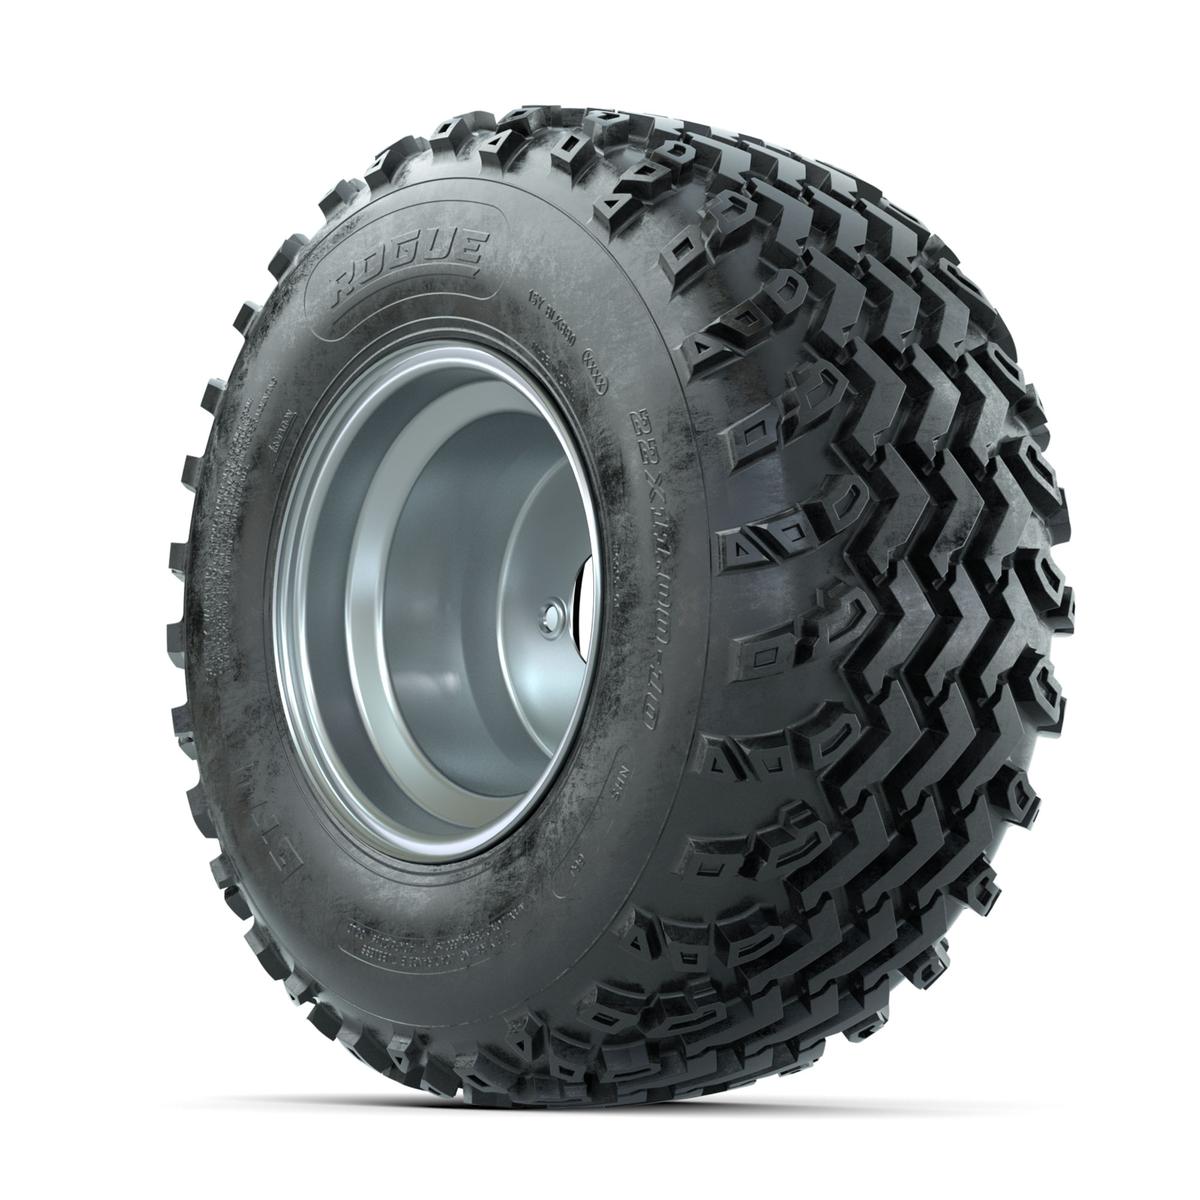 GTW Steel Silver 3:5 Offset 10 in Wheels with 22x11.00-10 Rogue All Terrain Tires – Full Set